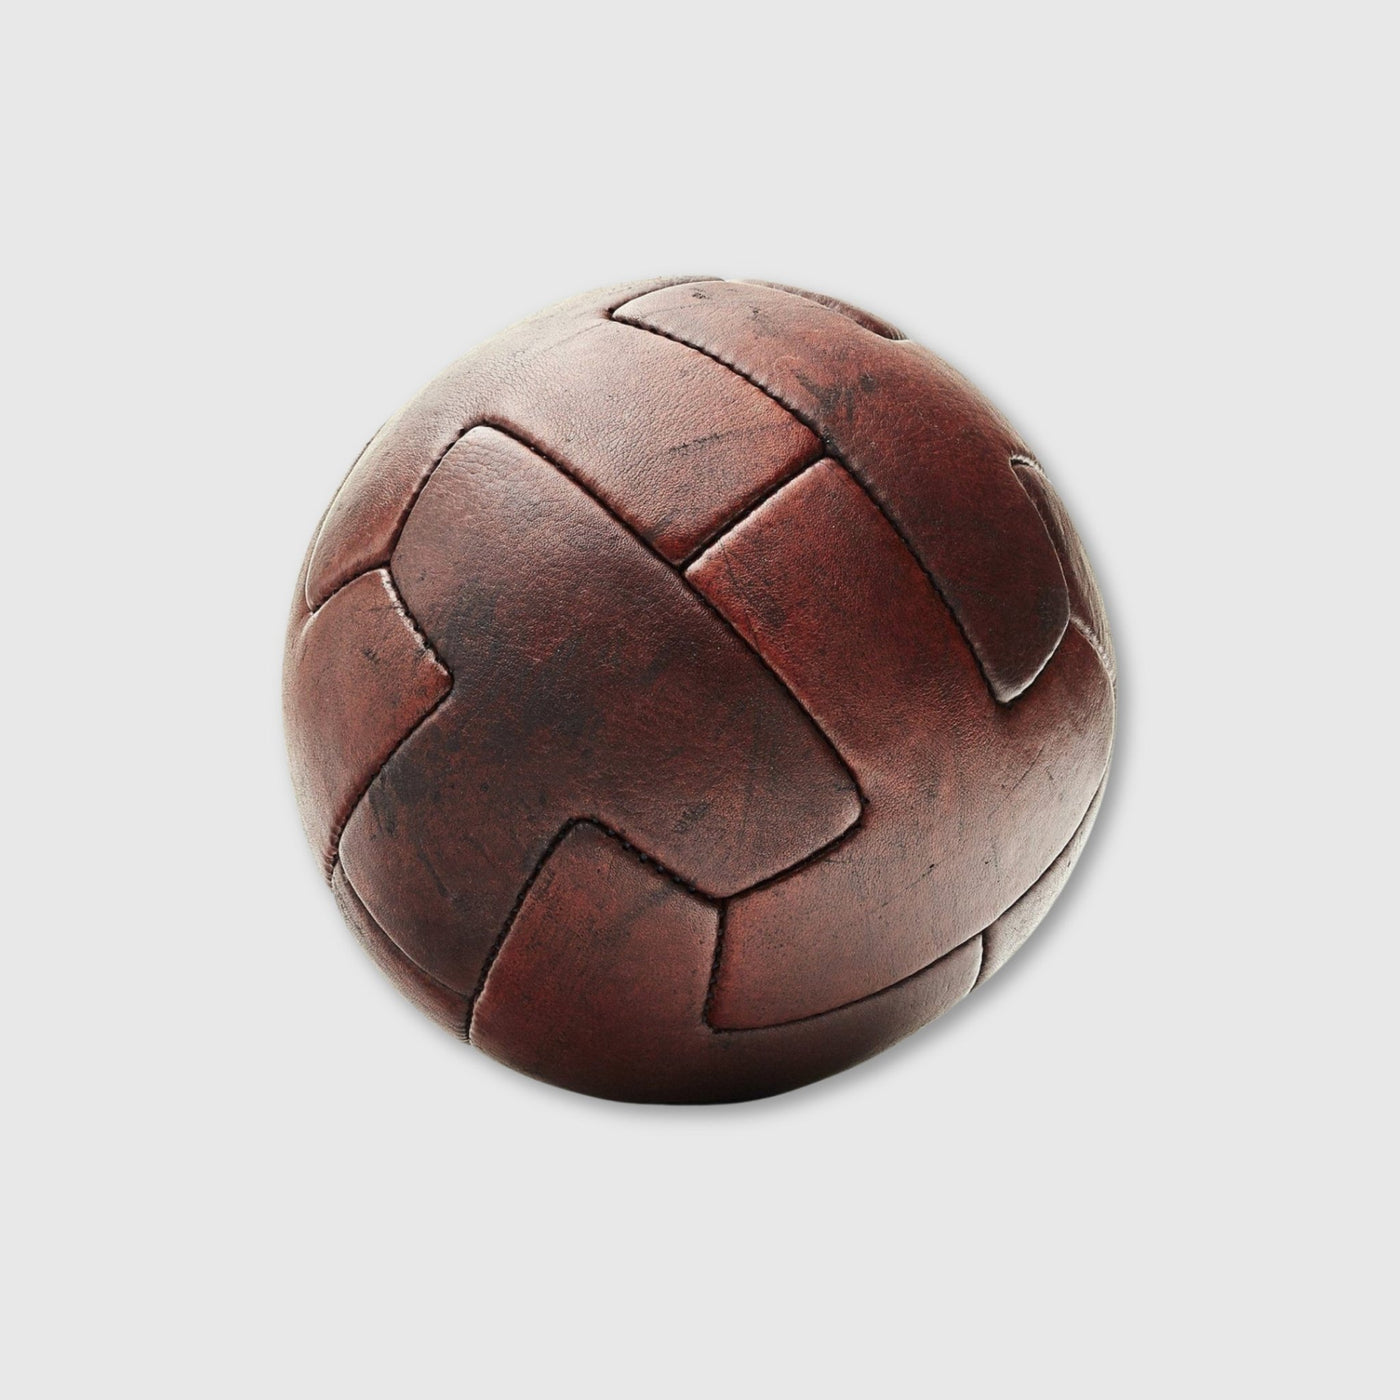 RETRO Heritage Brown Leather T Soccer ball - MODEST VINTAGE PLAYER LTD